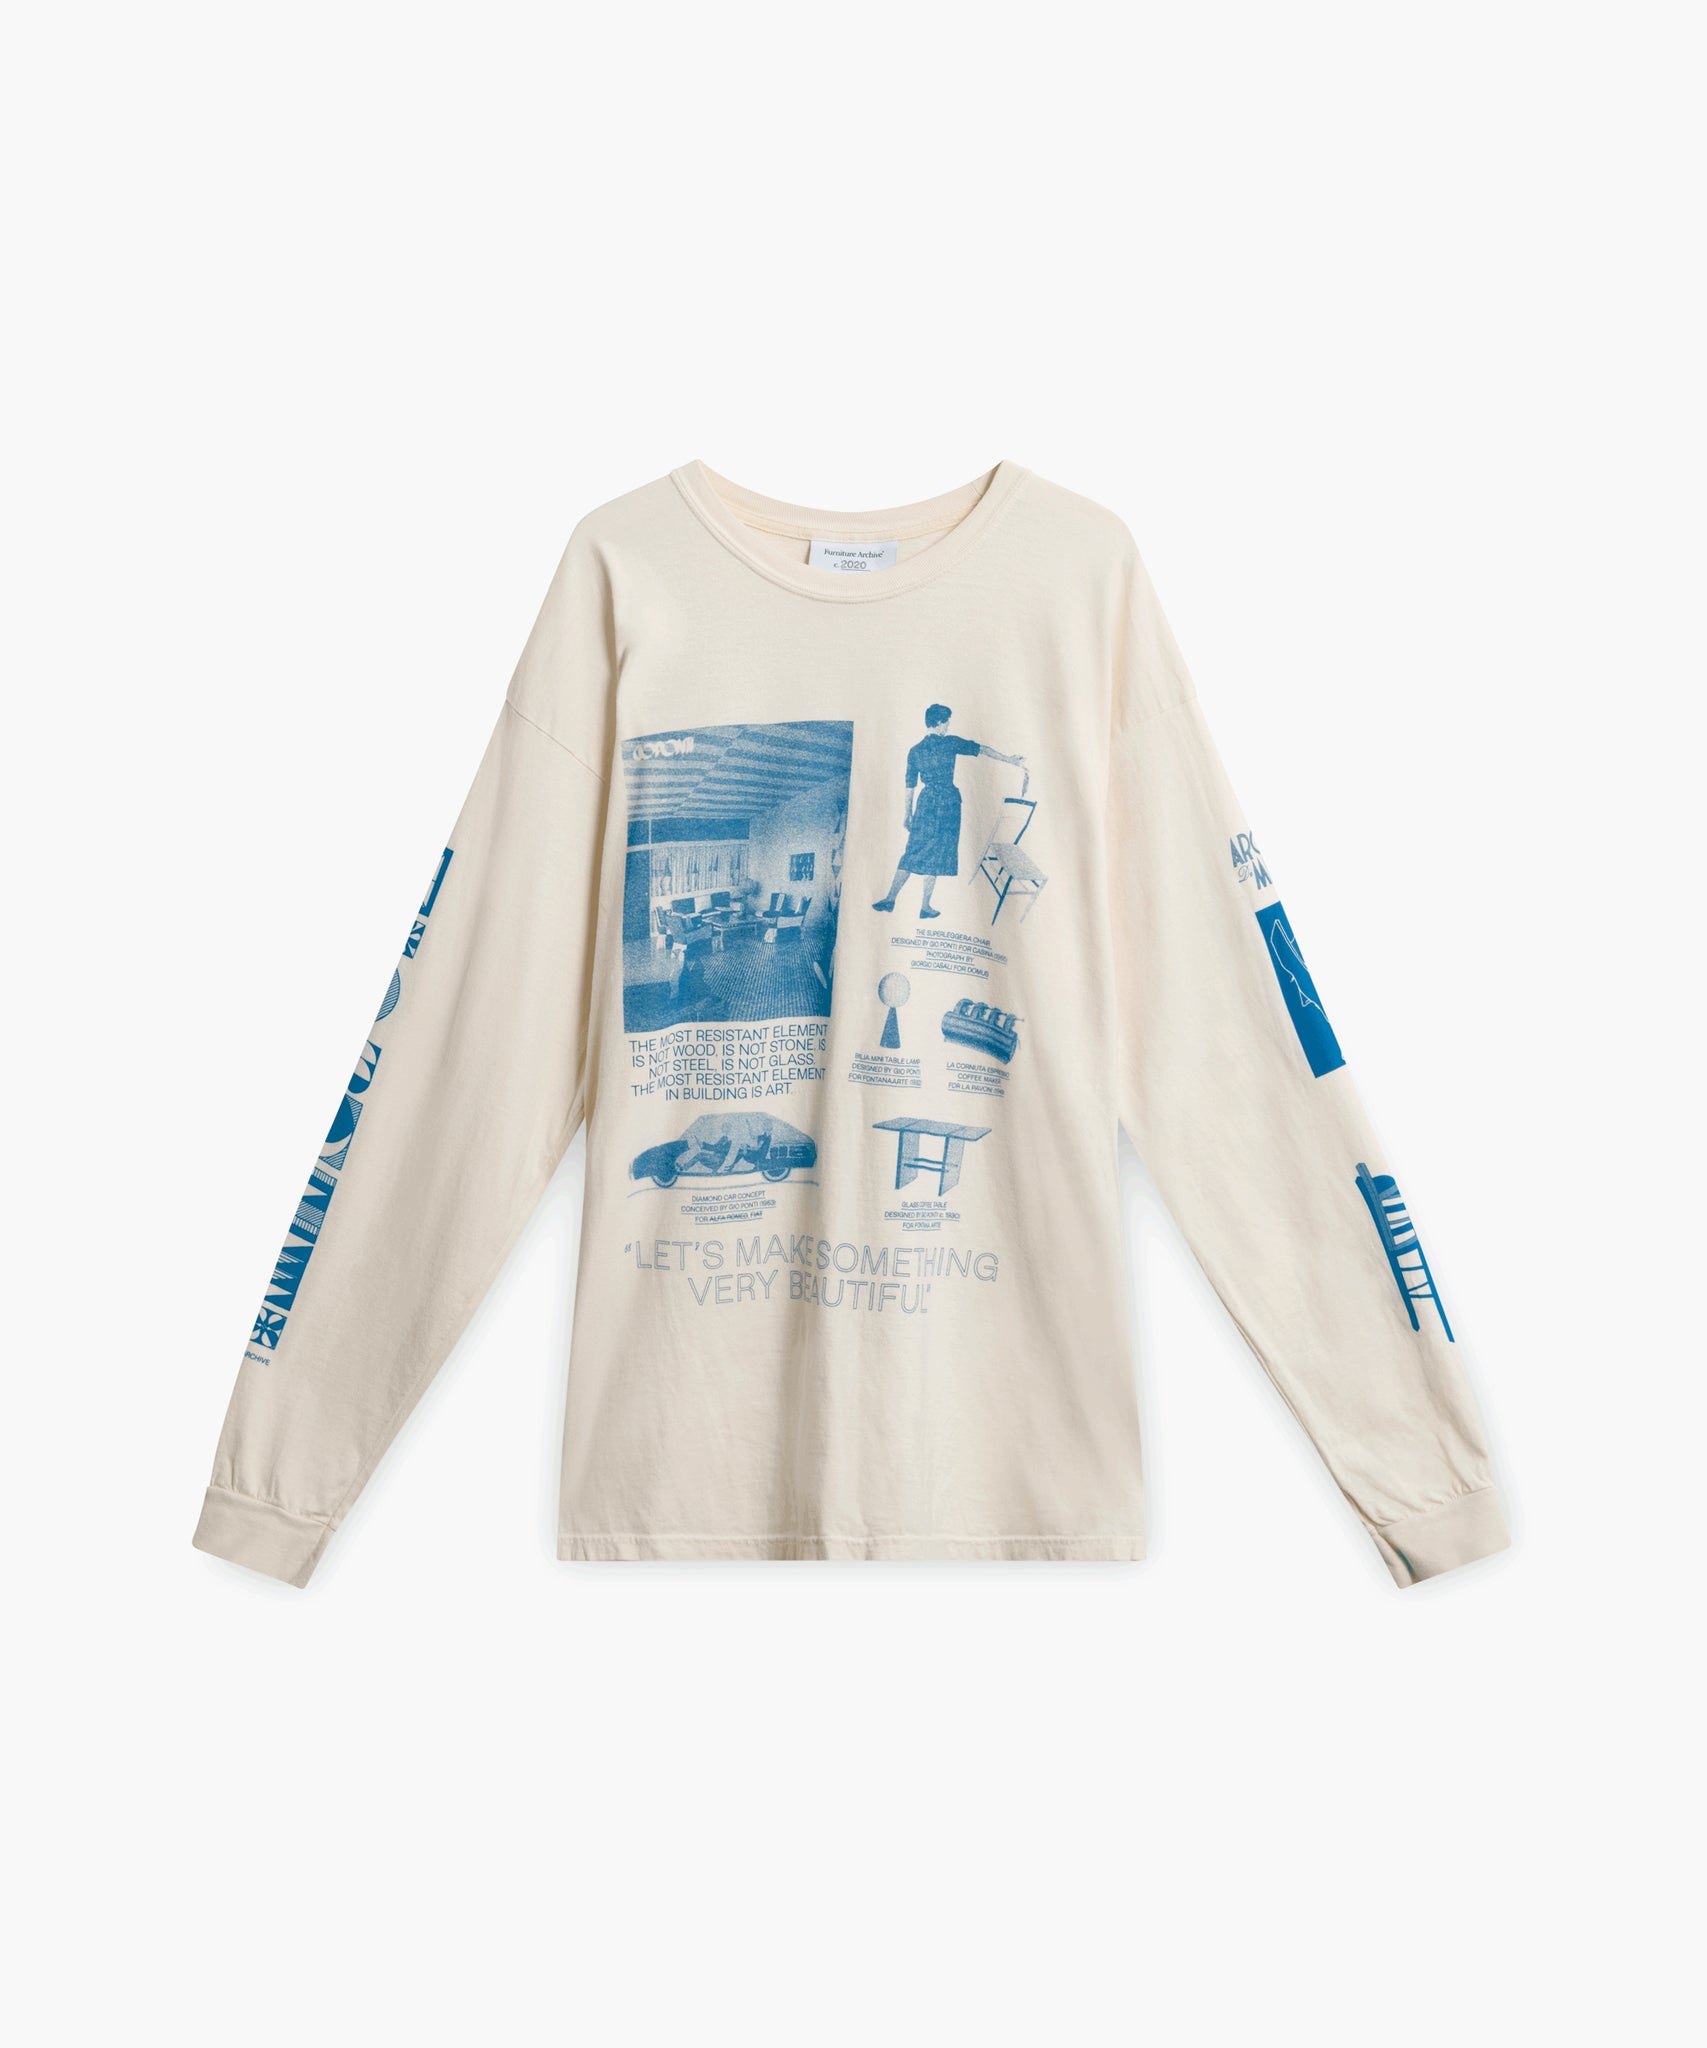 Furniture Archive LS Tee - Ivory